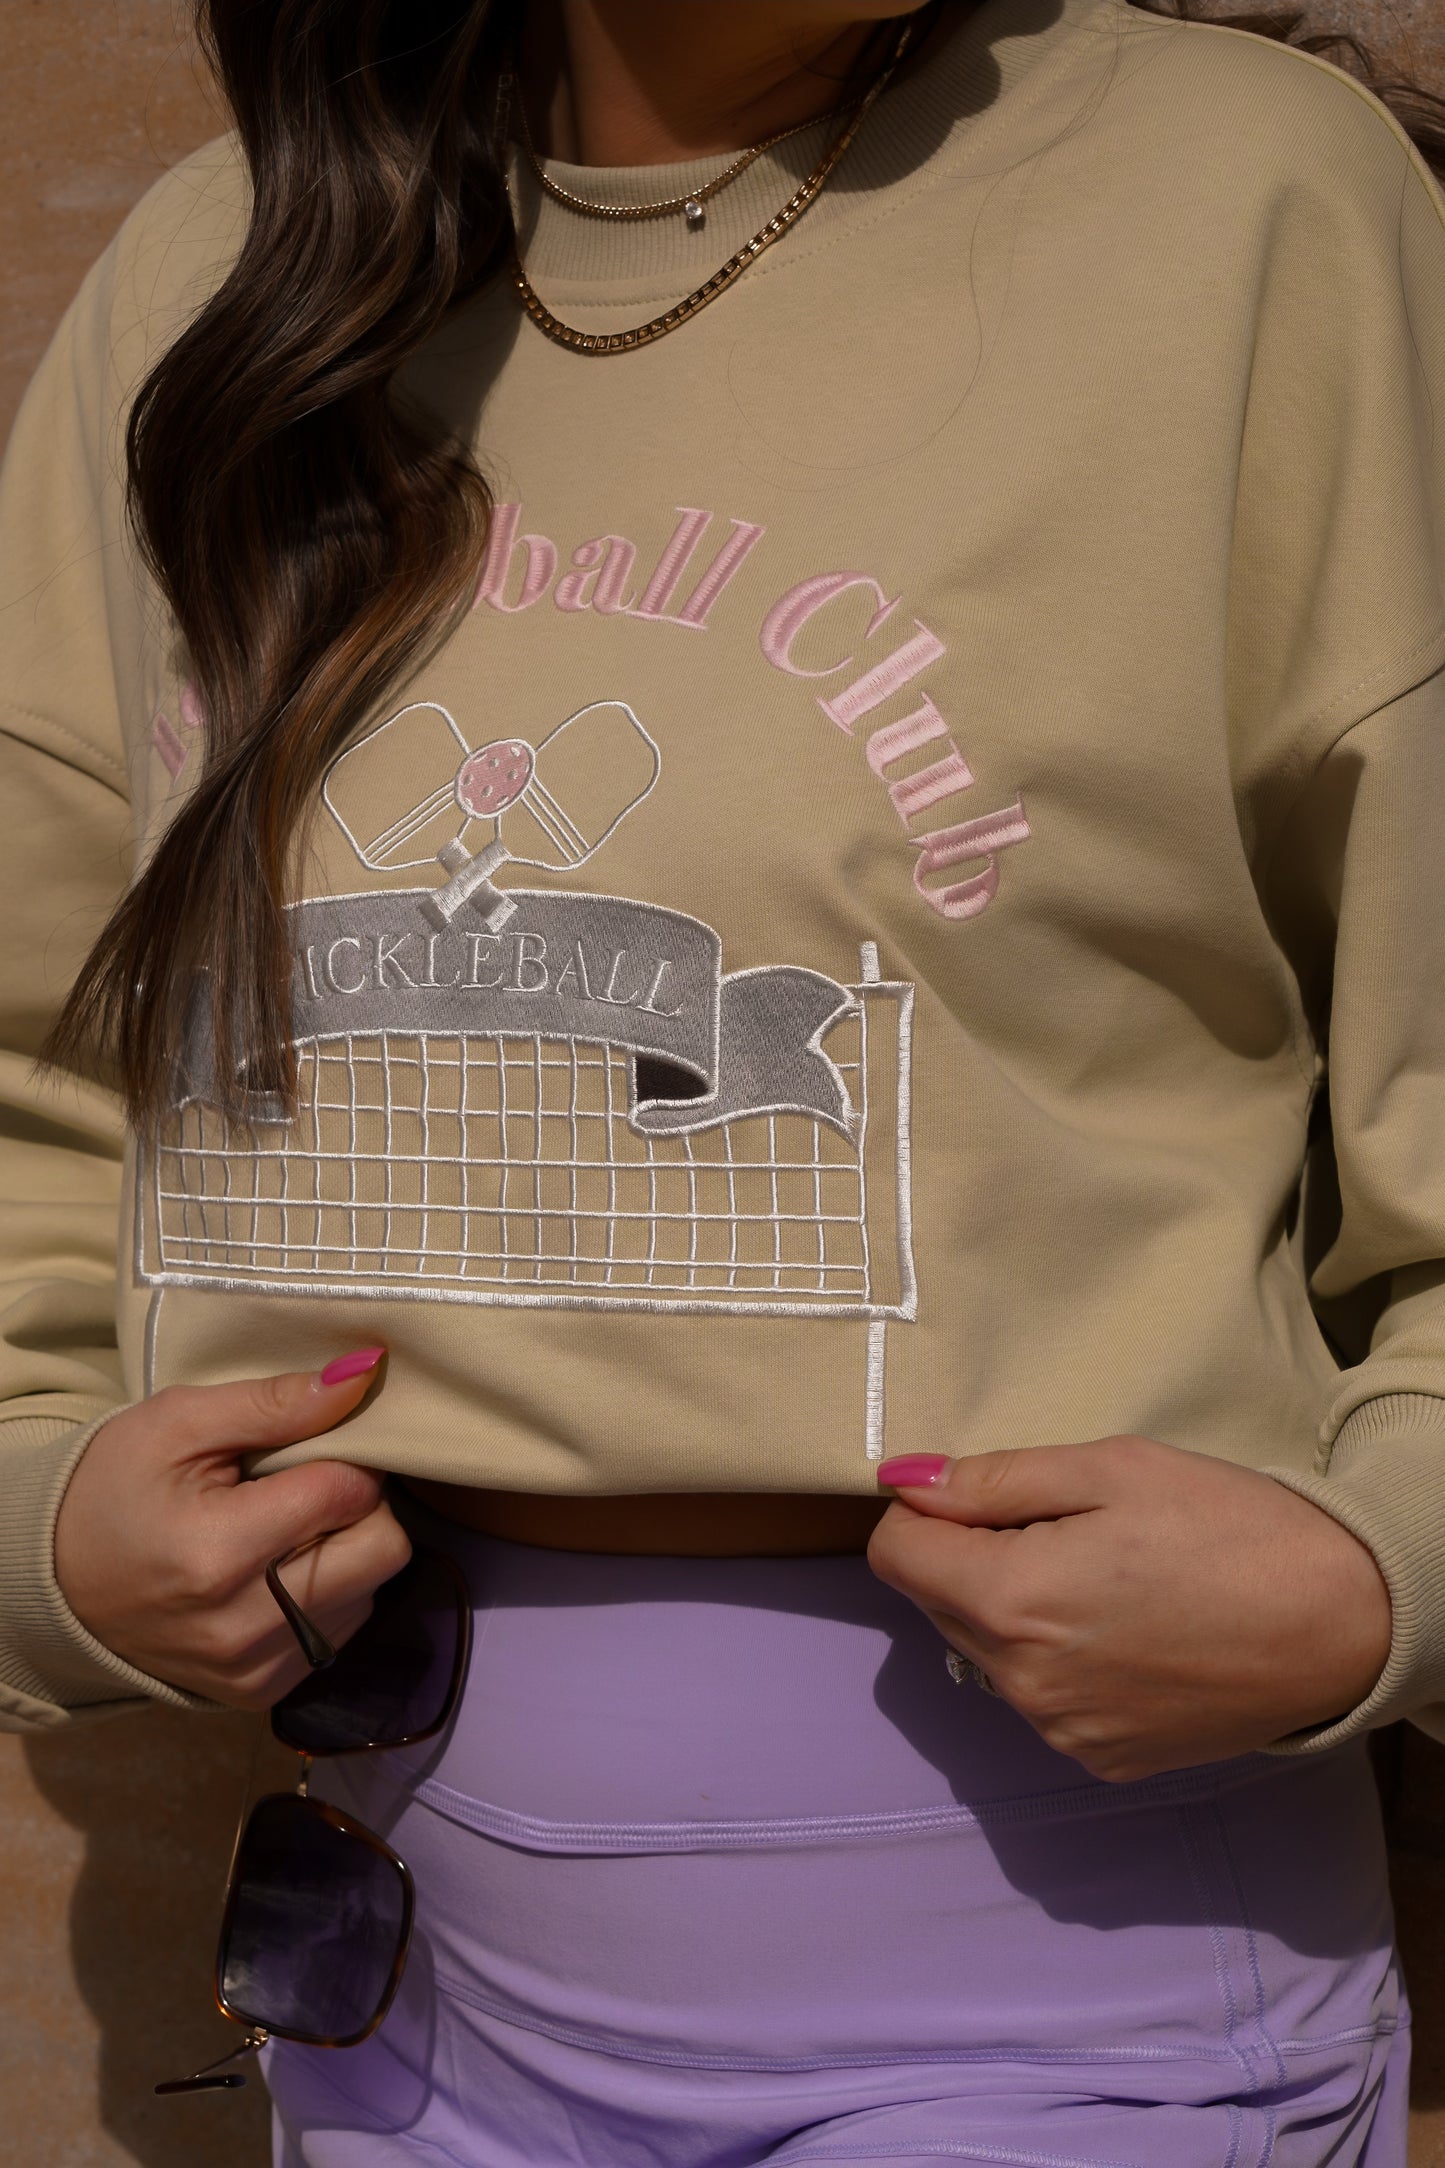 girl wearing sunglasses in our pickleball sweatshirt with tennis skirt